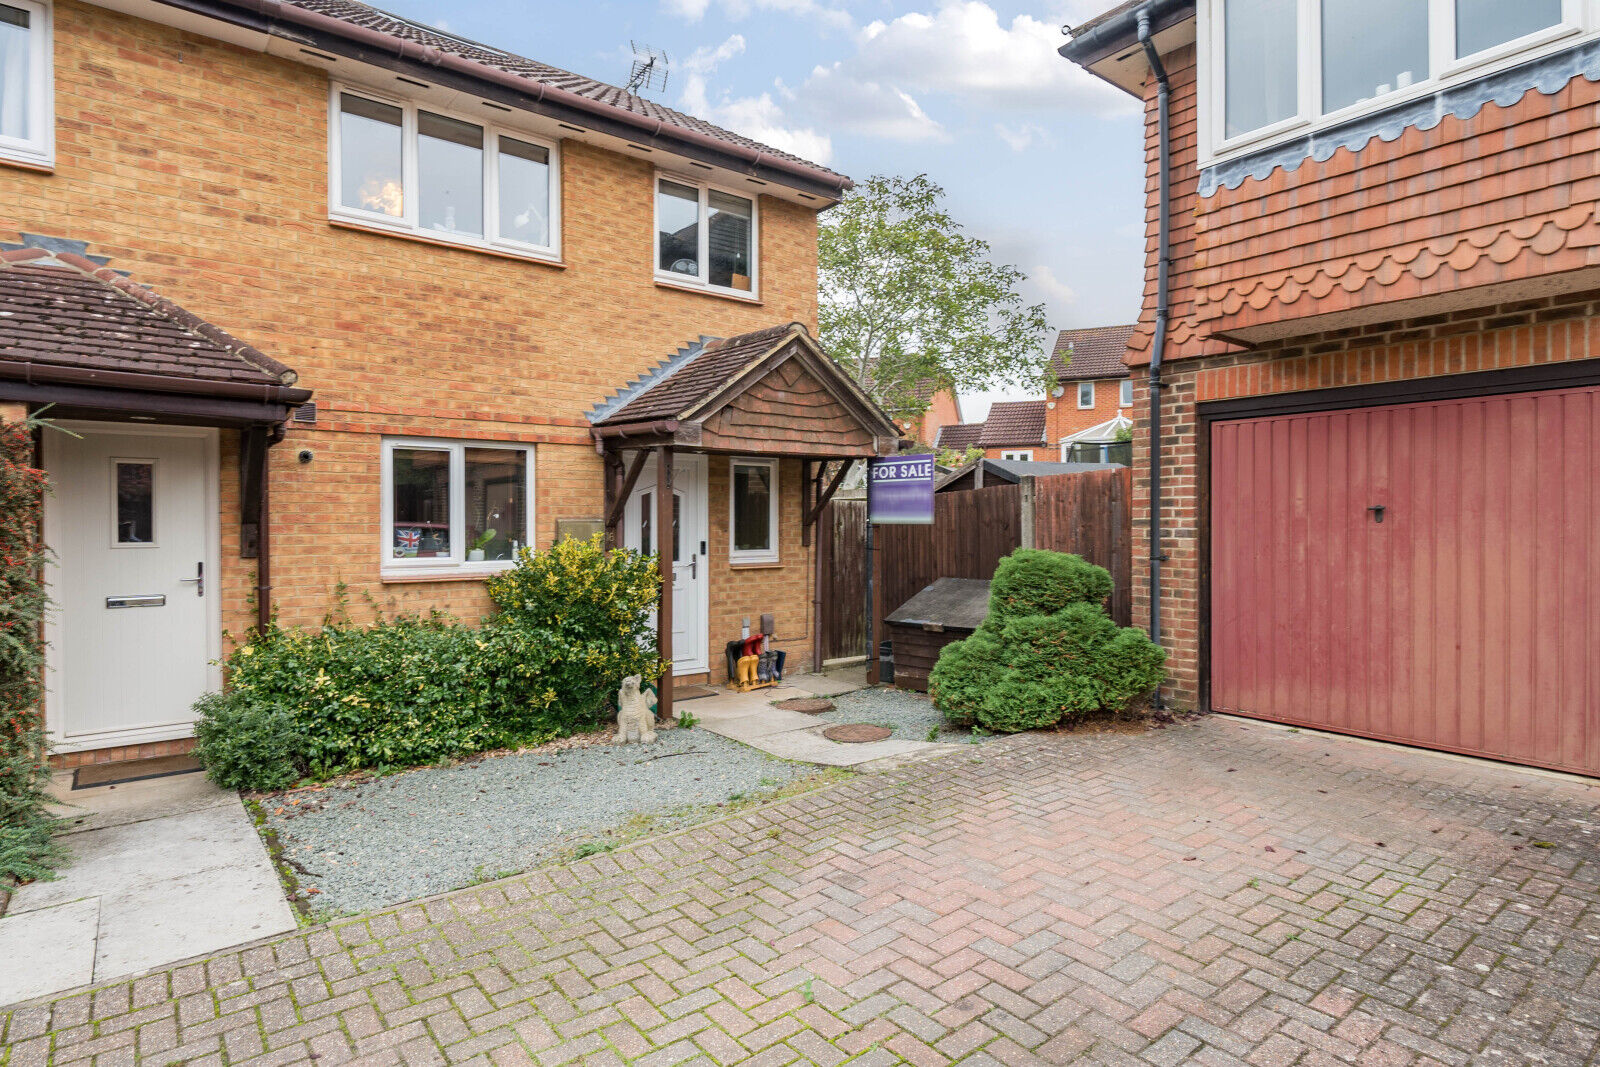 4 bedroom semi detached house for sale Hubbard Close, Twyford, RG10, main image